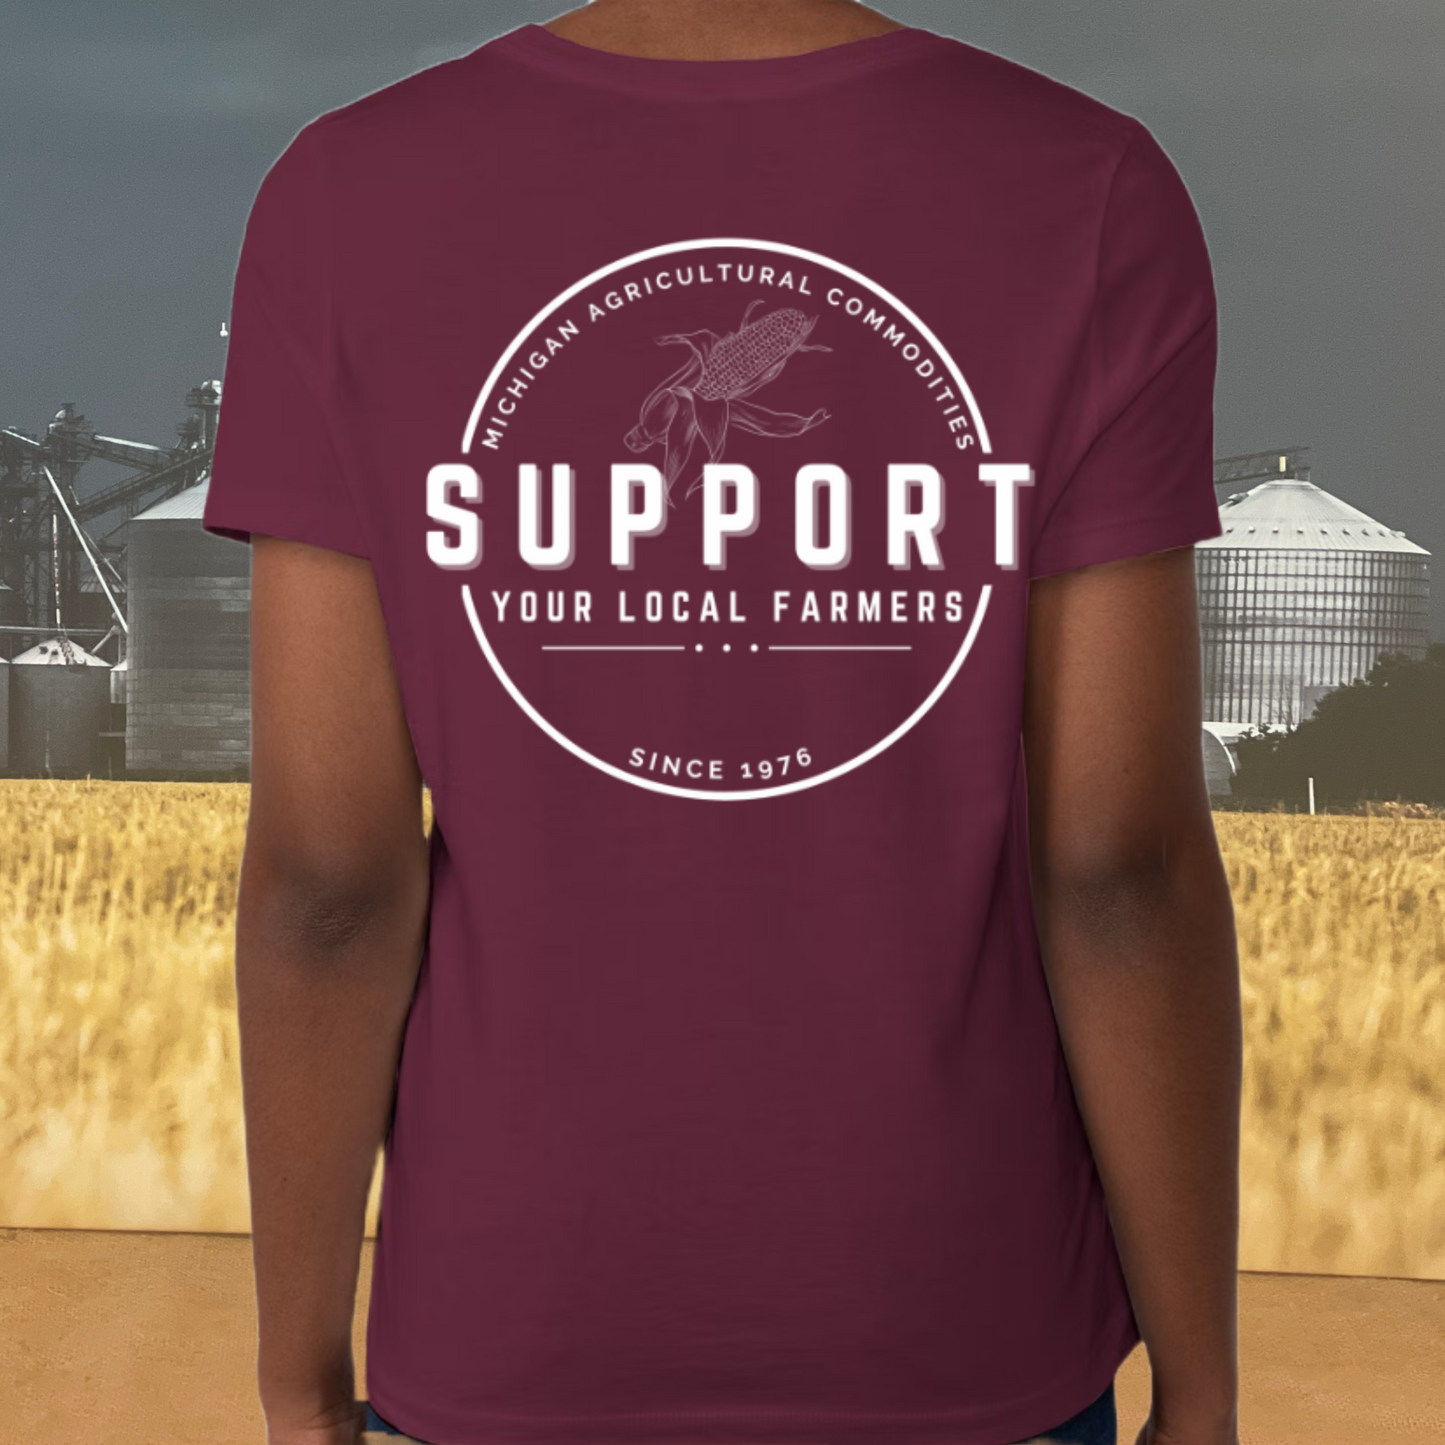 M.A.C. Support Your Local Farmers T-Shirt - MAROON